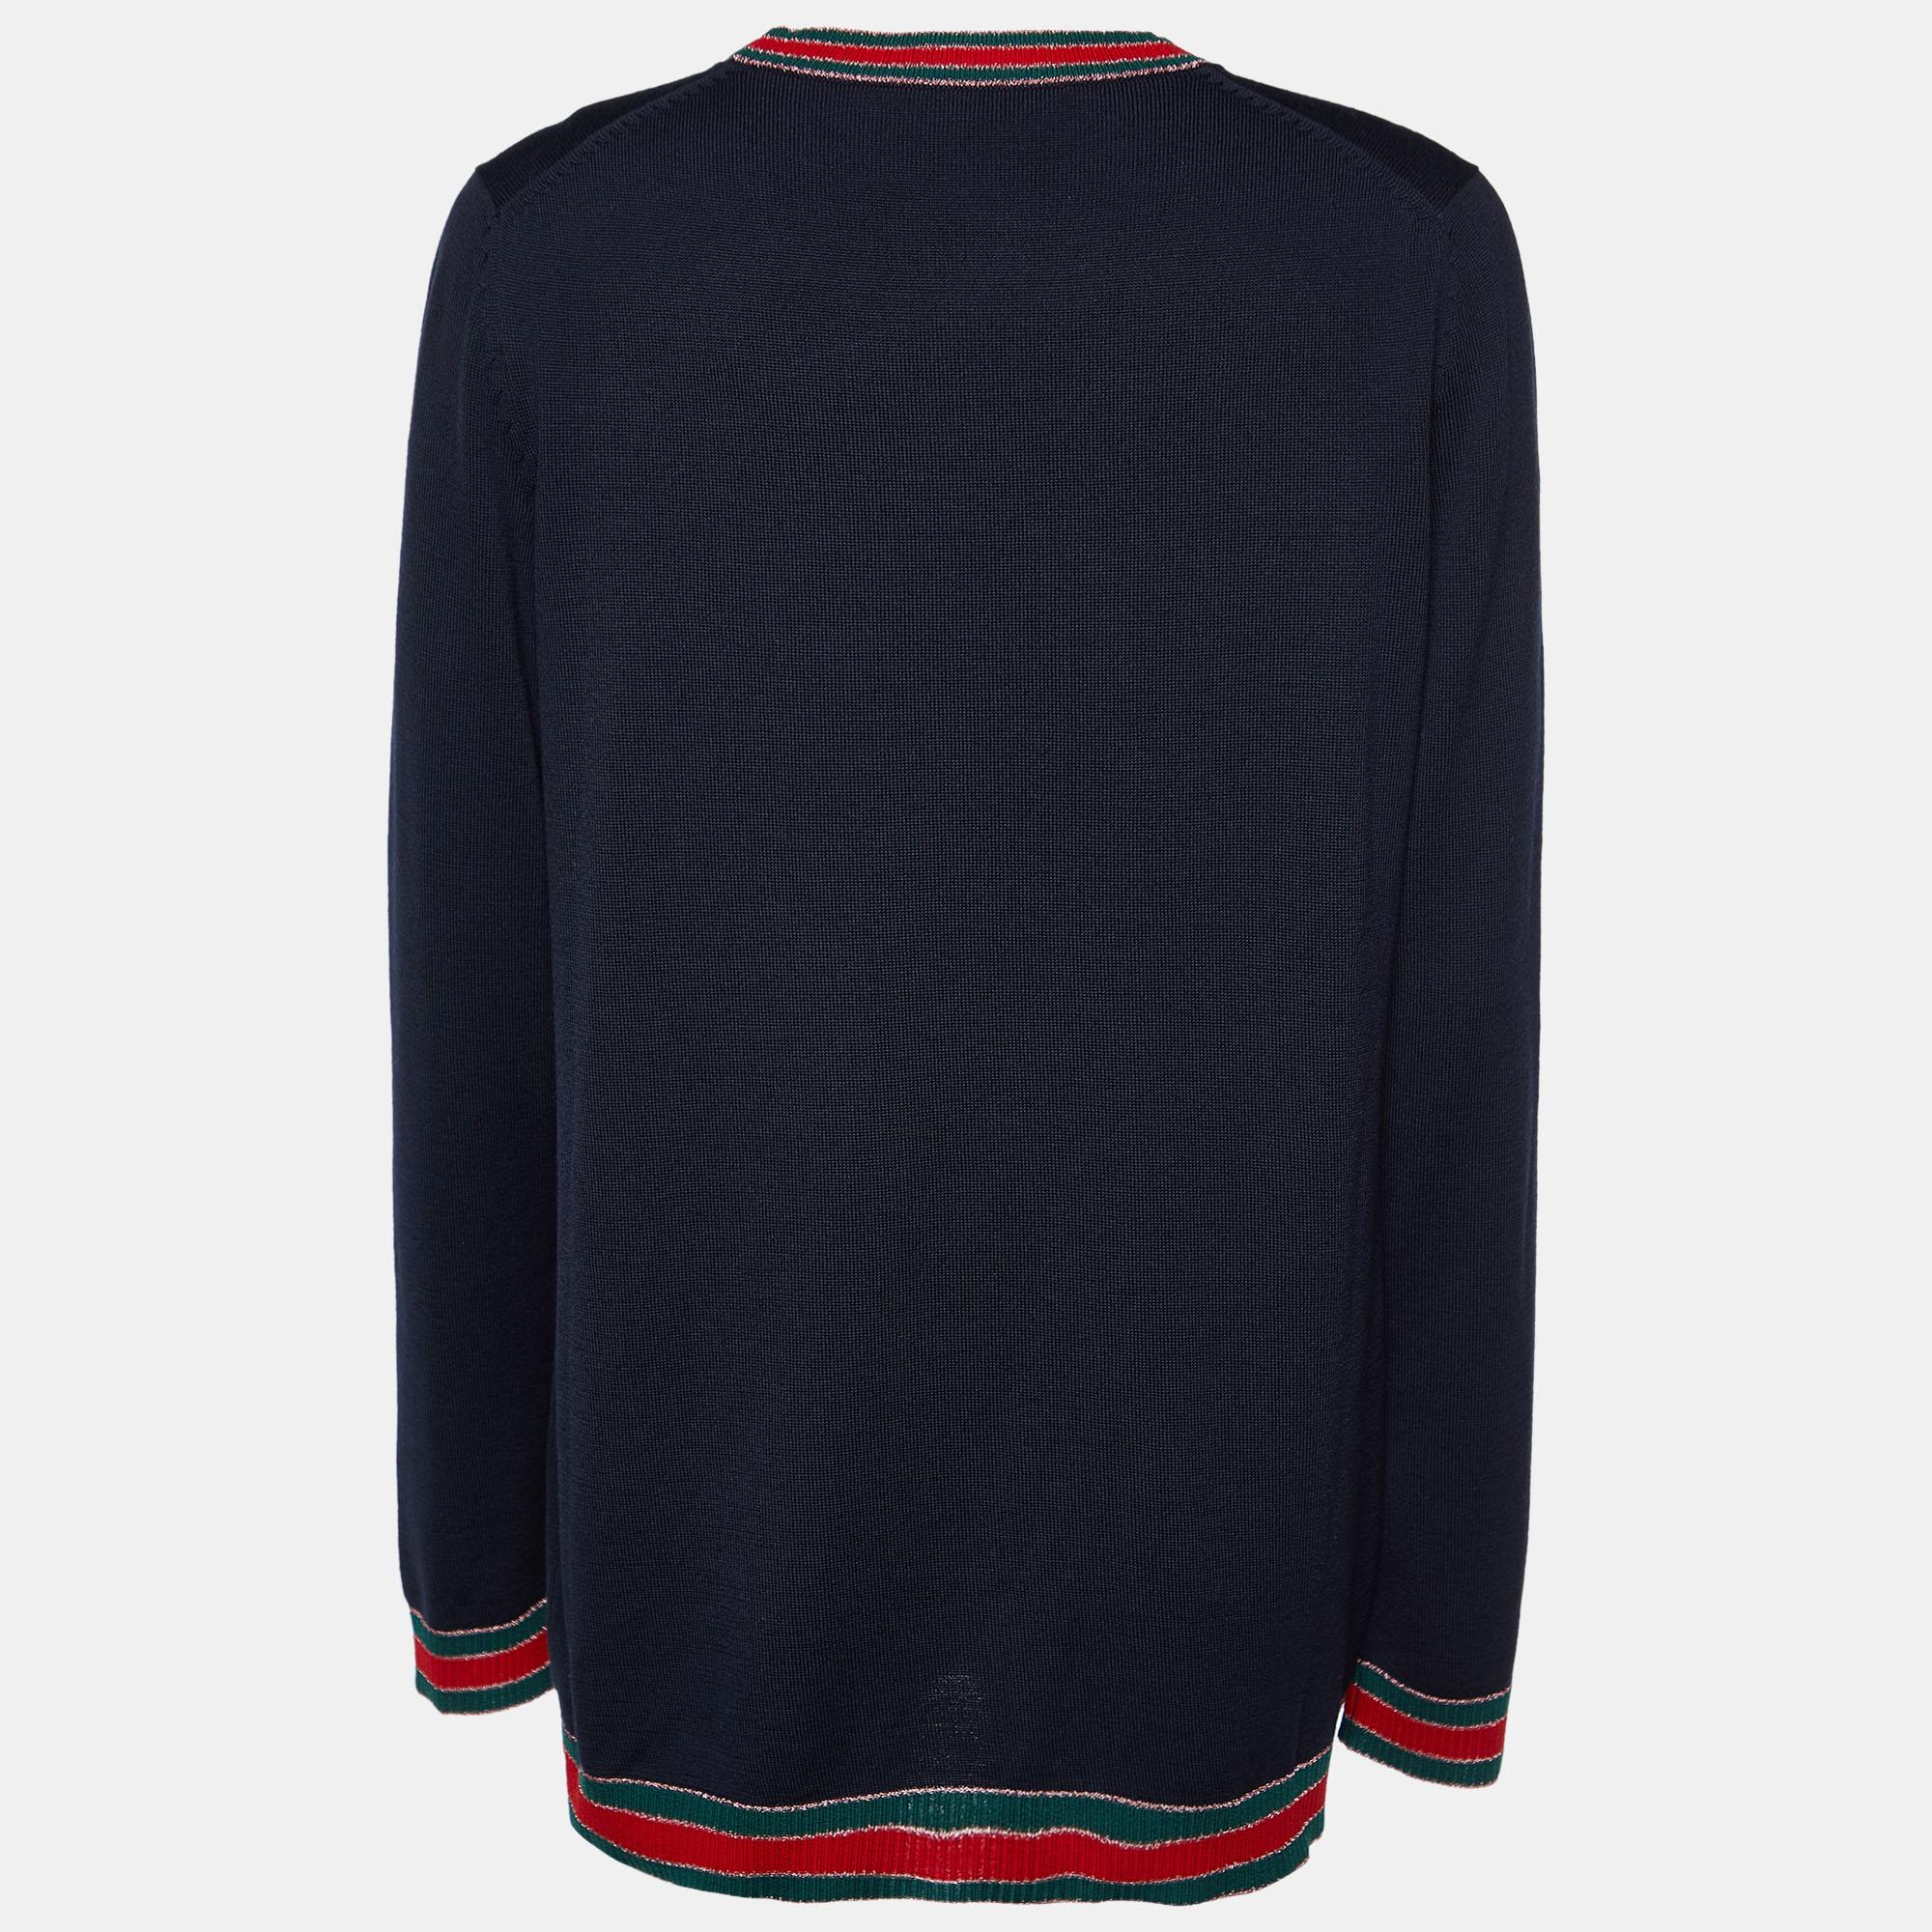 Wrap yourself in the understated luxury of the Gucci cardigan. Crafted with precision from fine wool, this cardigan features a sleek button-front design accentuated by the iconic Gucci web trim. Effortlessly stylish, it exudes timeless charm and